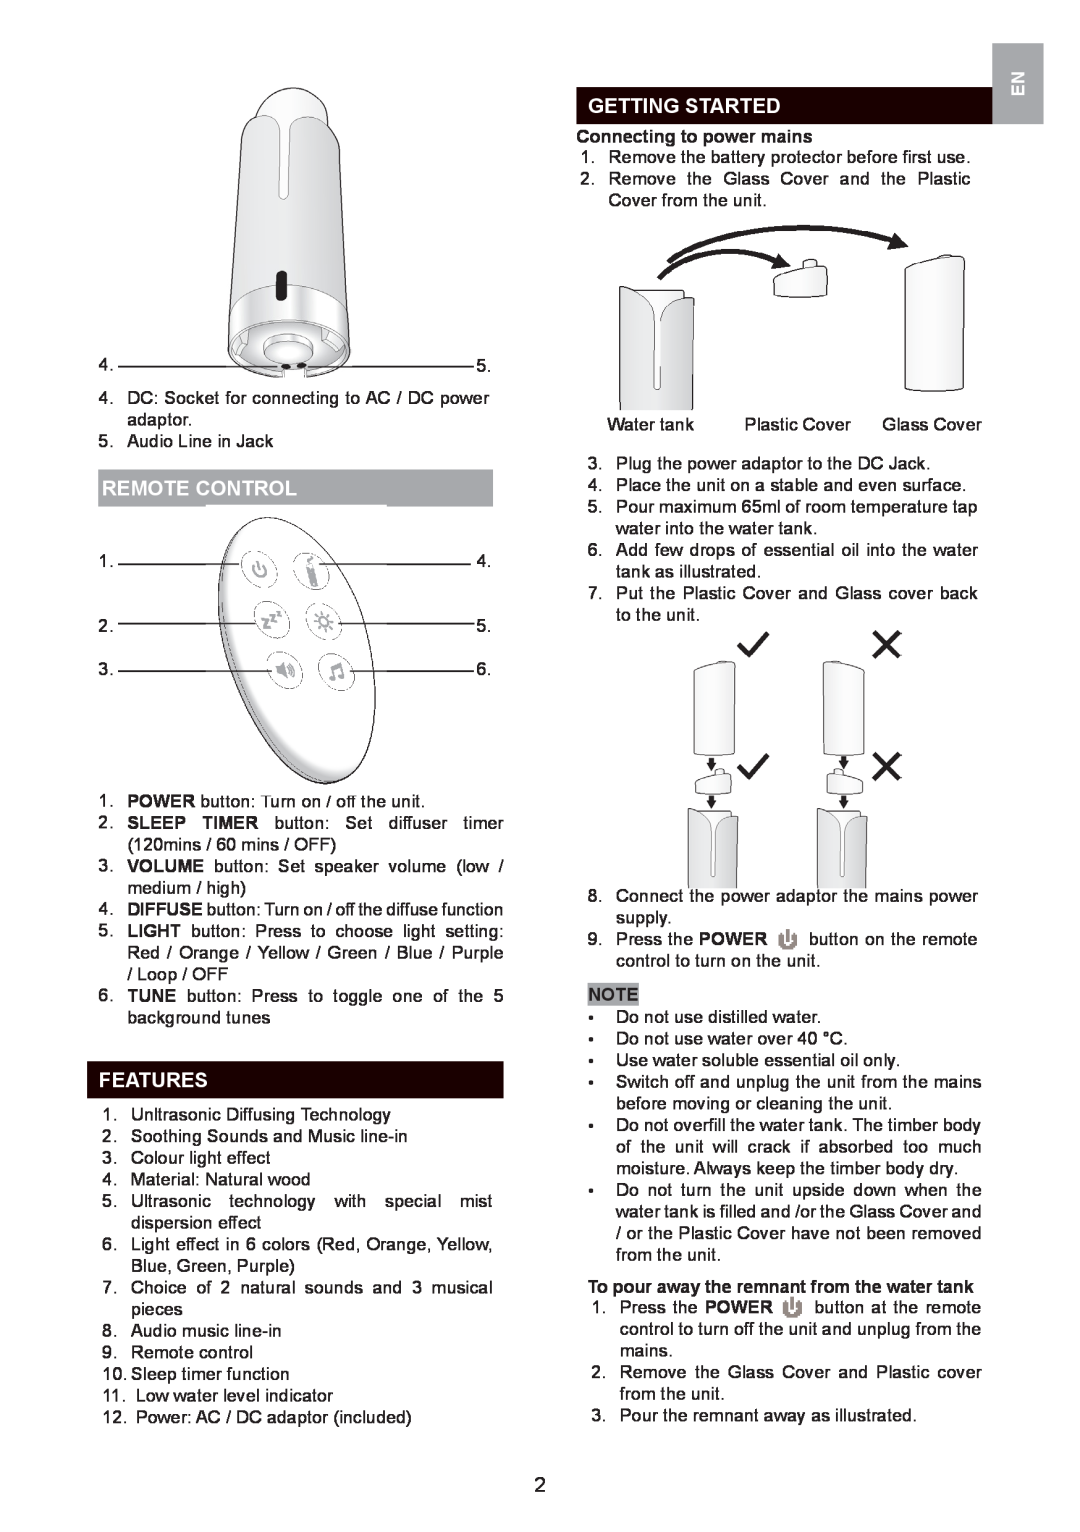 Oregon Scientific WS909 user manual Remote Control, Features, Getting Started, Connecting to power mains 